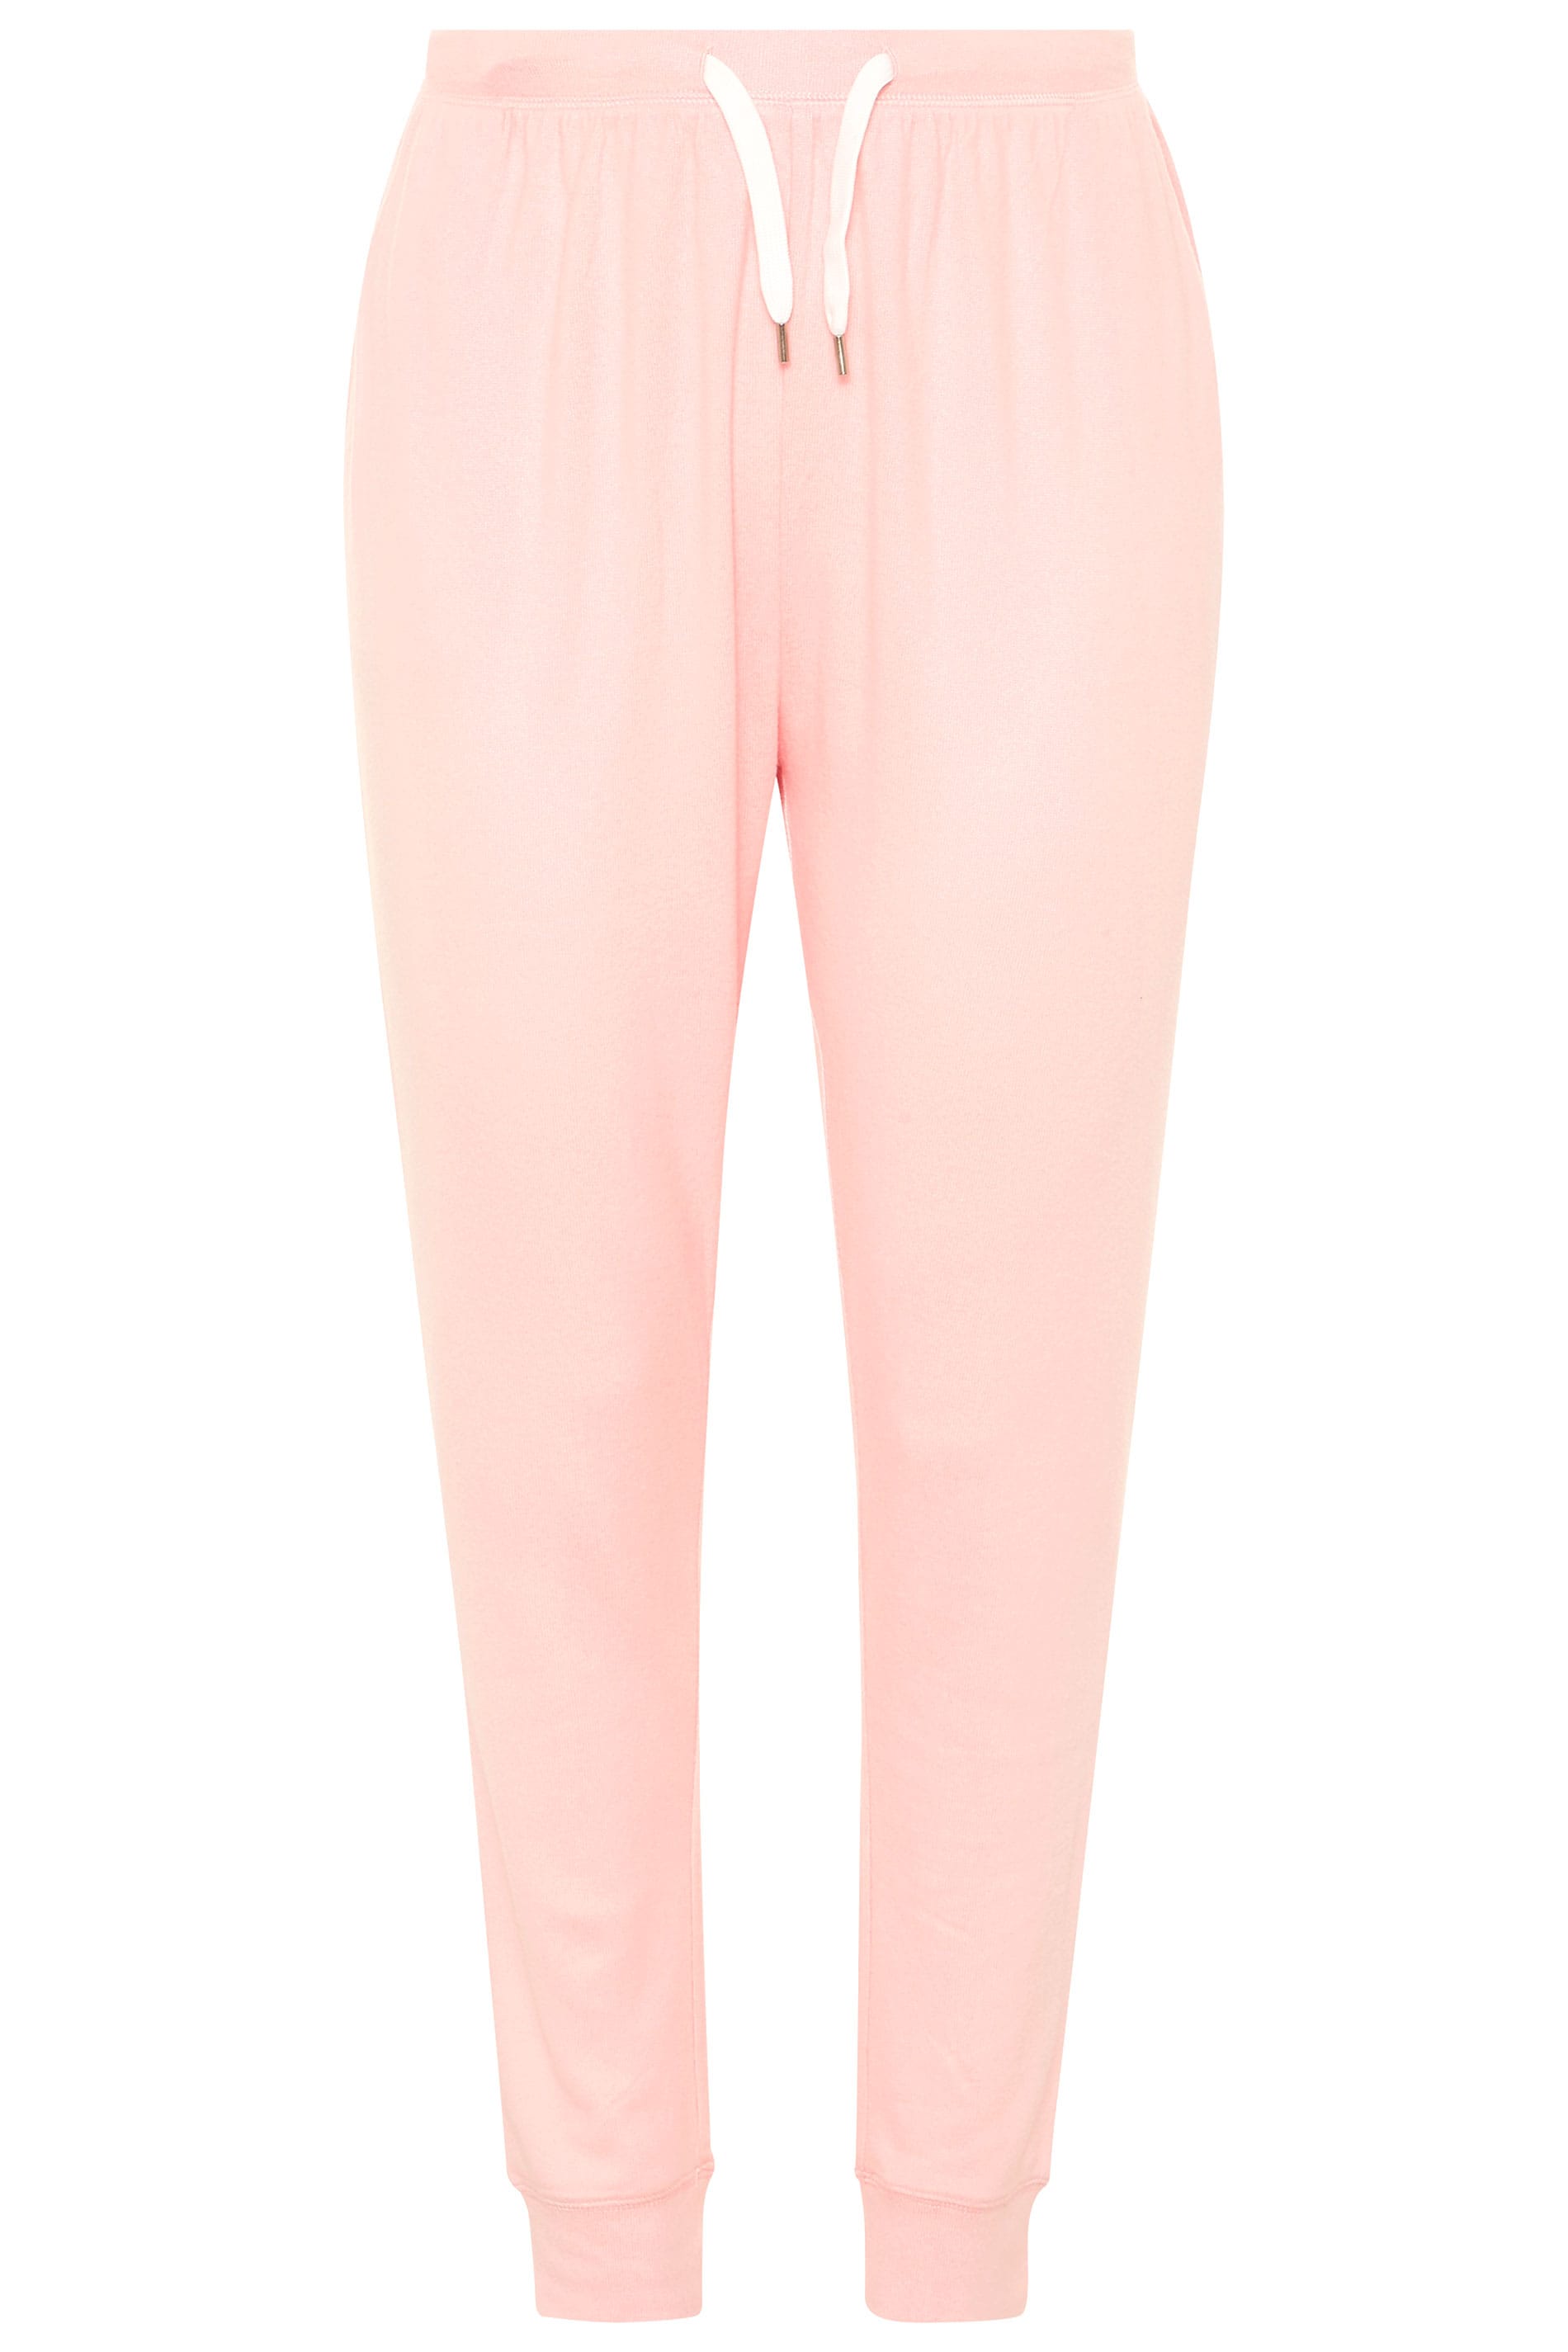 Pink Soft Jersey Lounge Pants | Yours Clothing